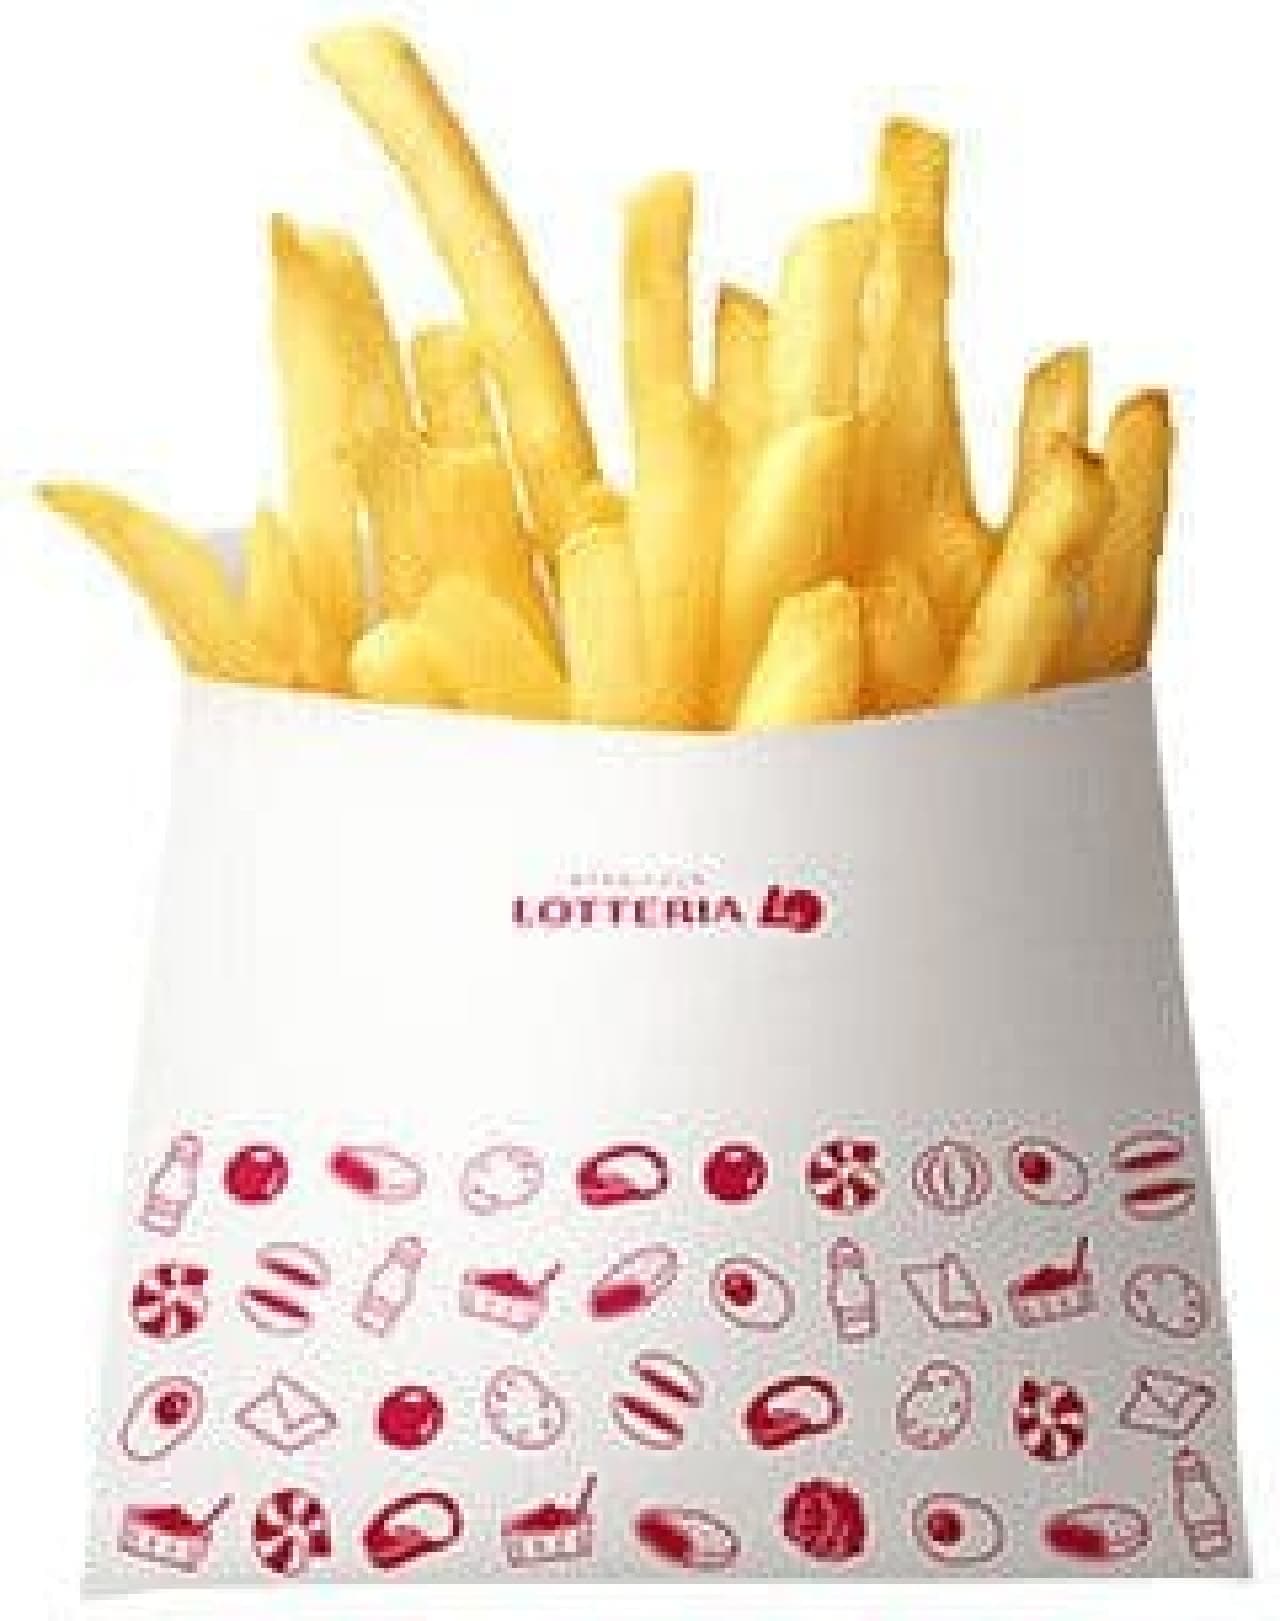 Lotteria "French Fries S